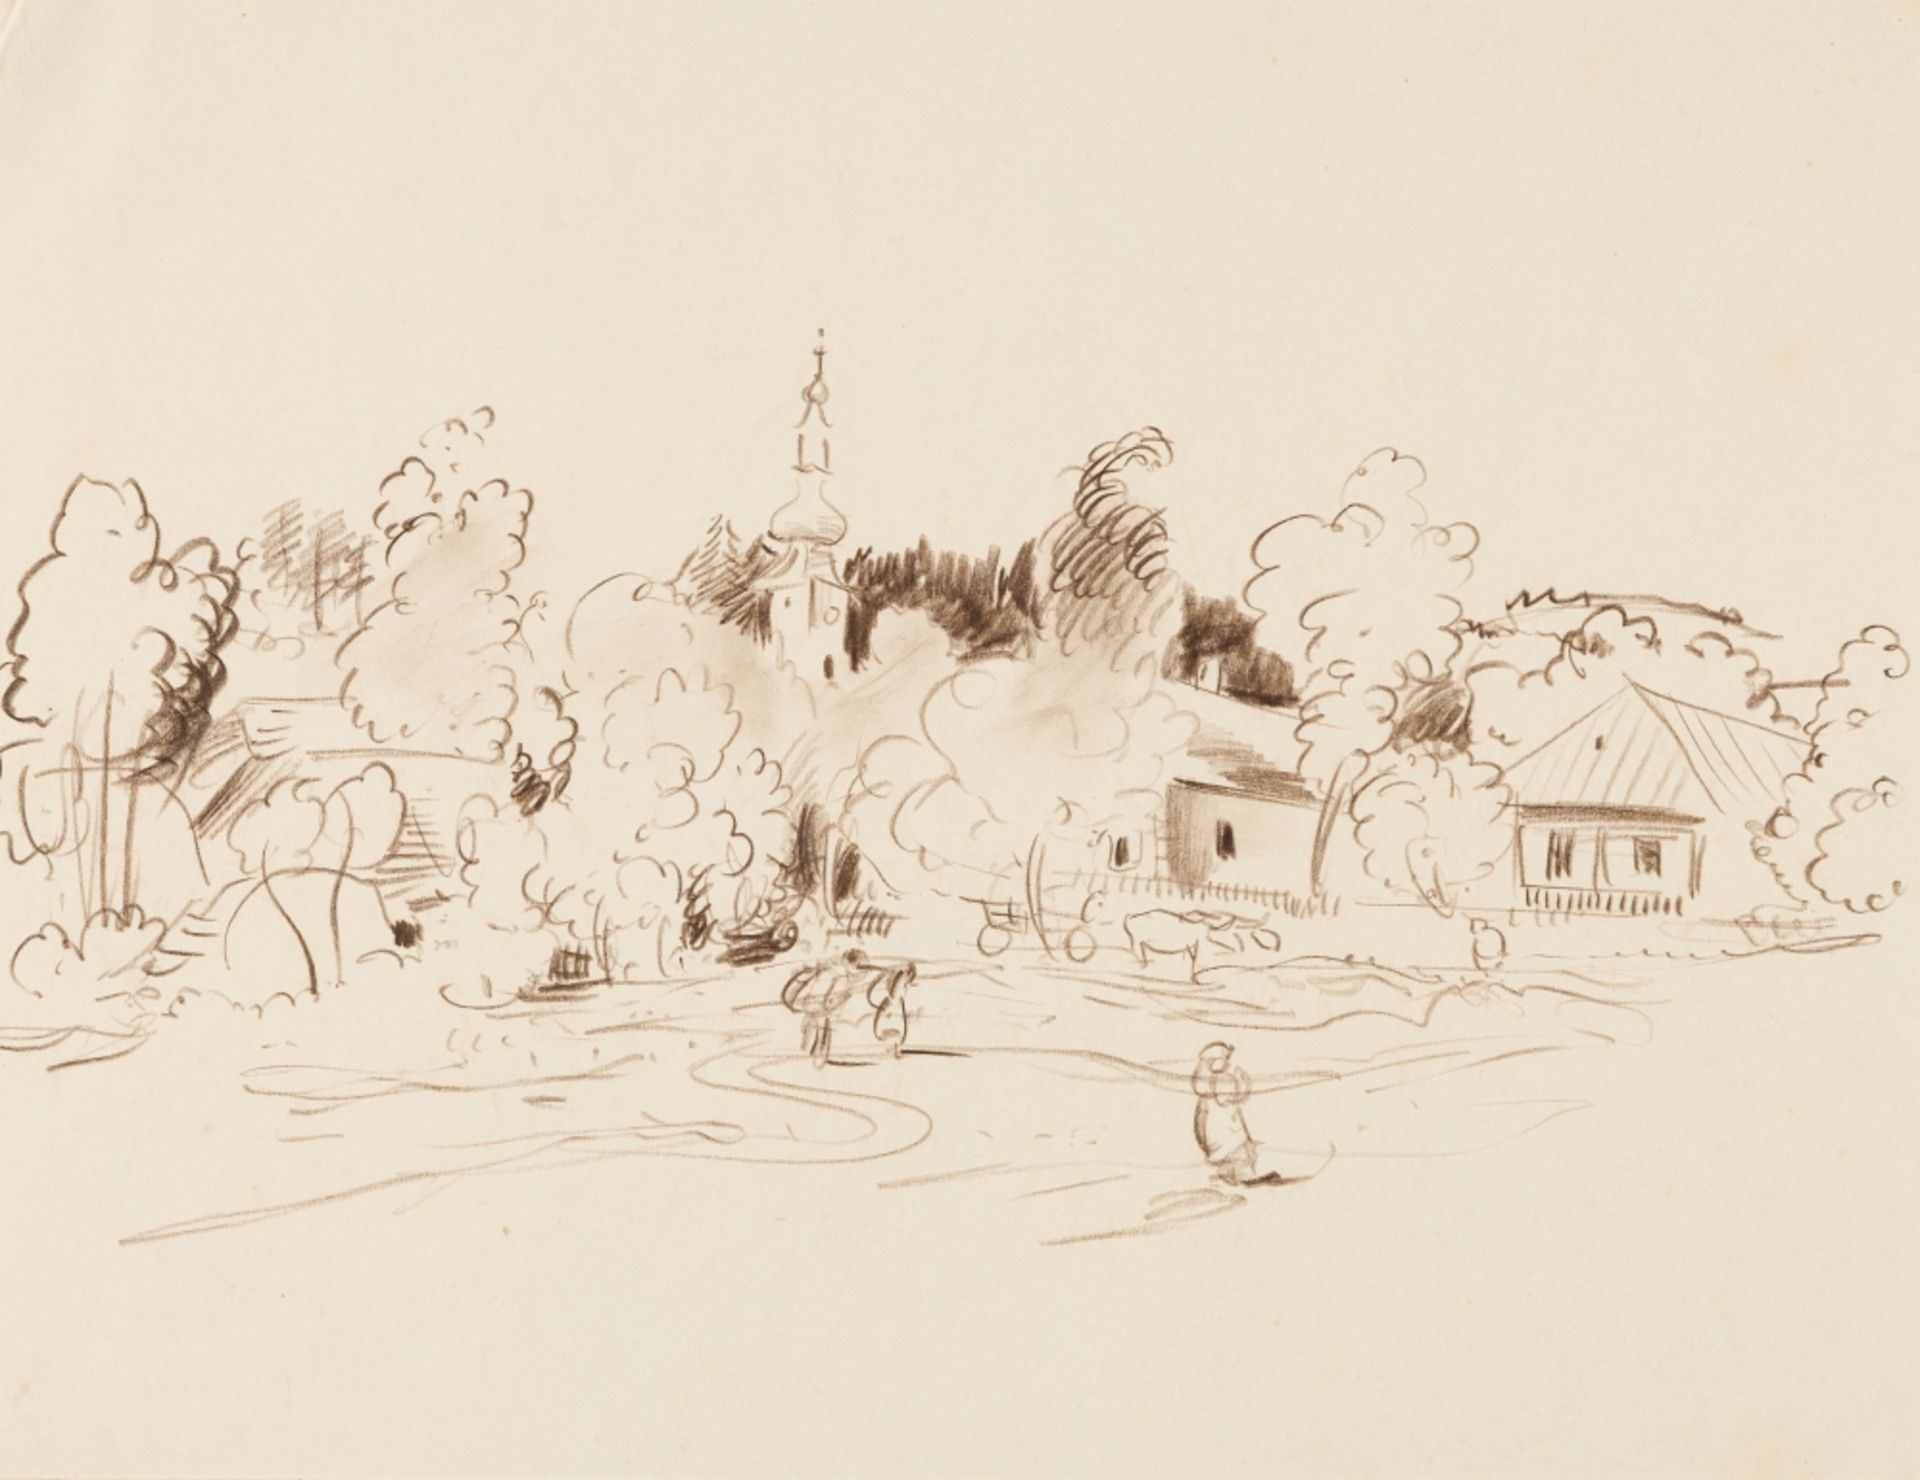 Mayer-Marton, Georg(1897 - 1960)Villagescapebrown charcoal on paper8,8 x 11,4 in